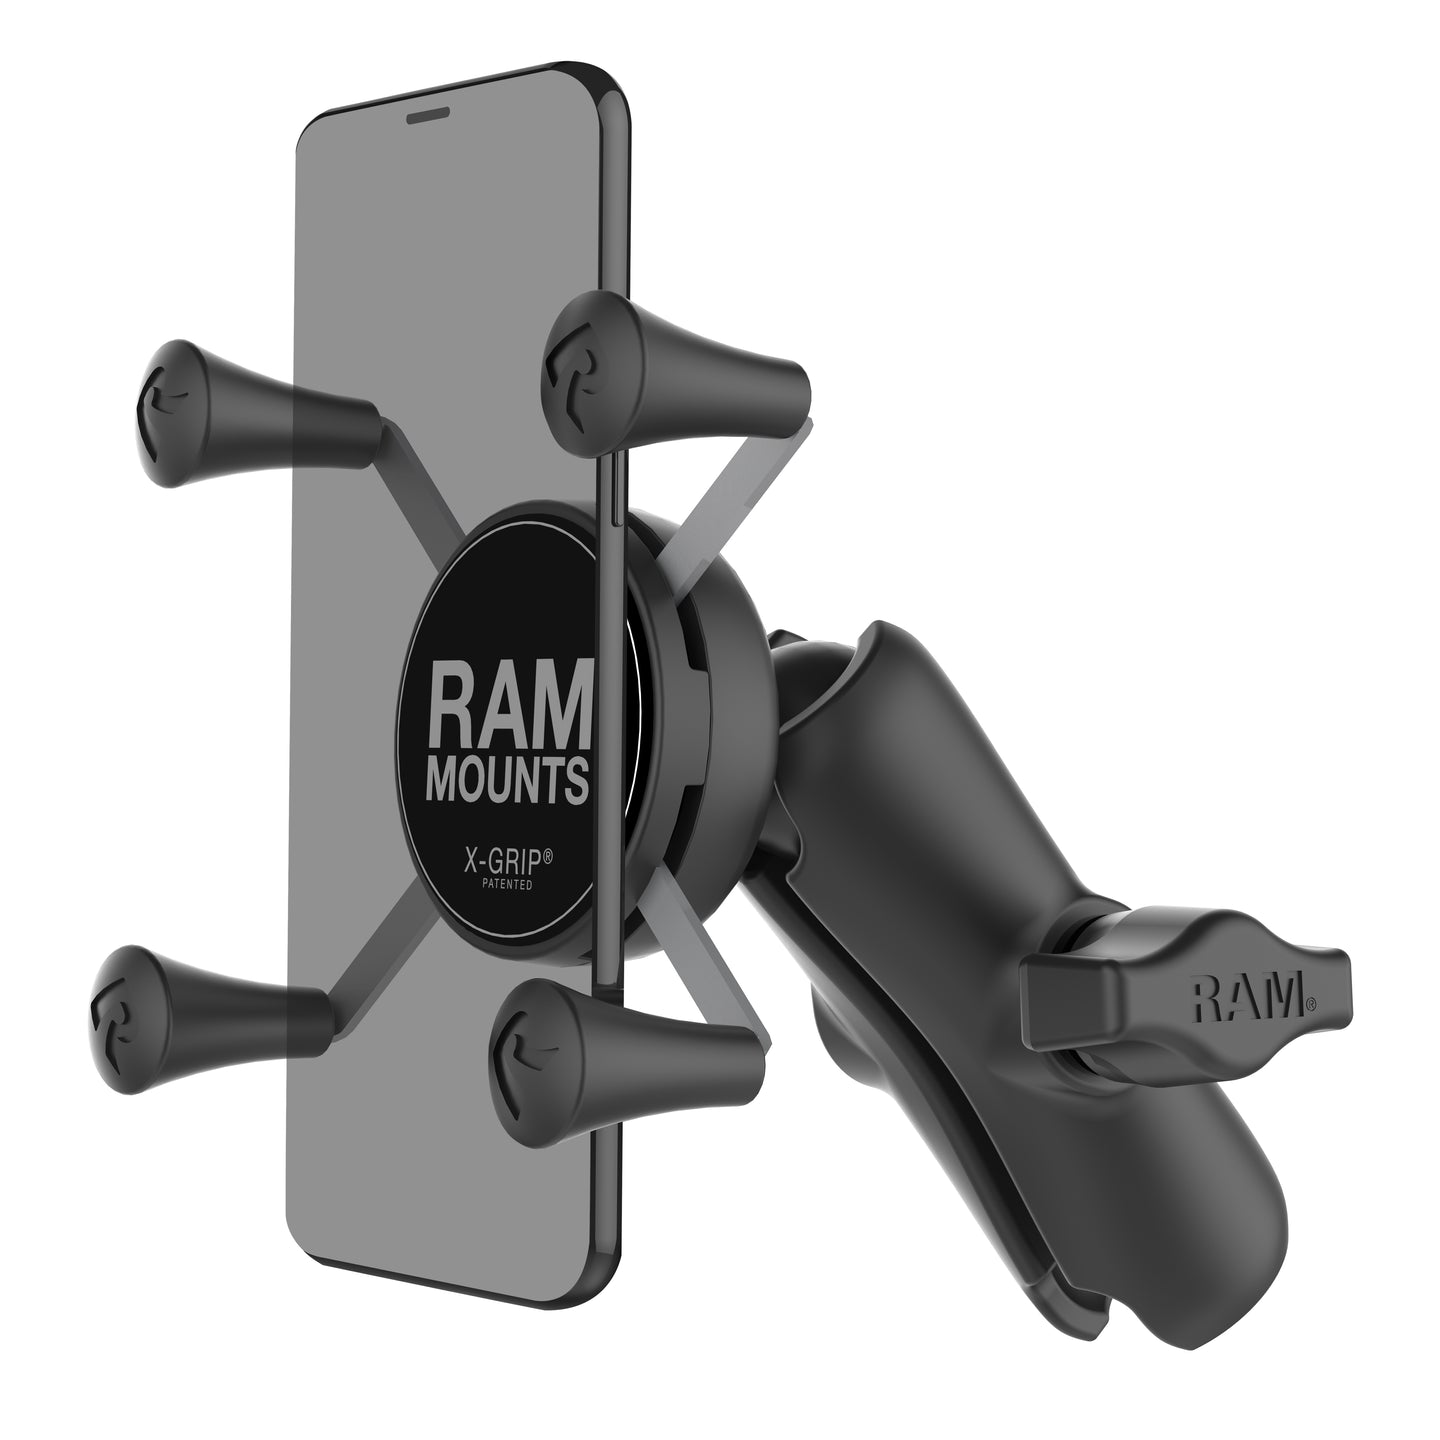 RAM Mounts X-Grip® Phone Holder with Composite Double Socket Arm - image 1 of 7